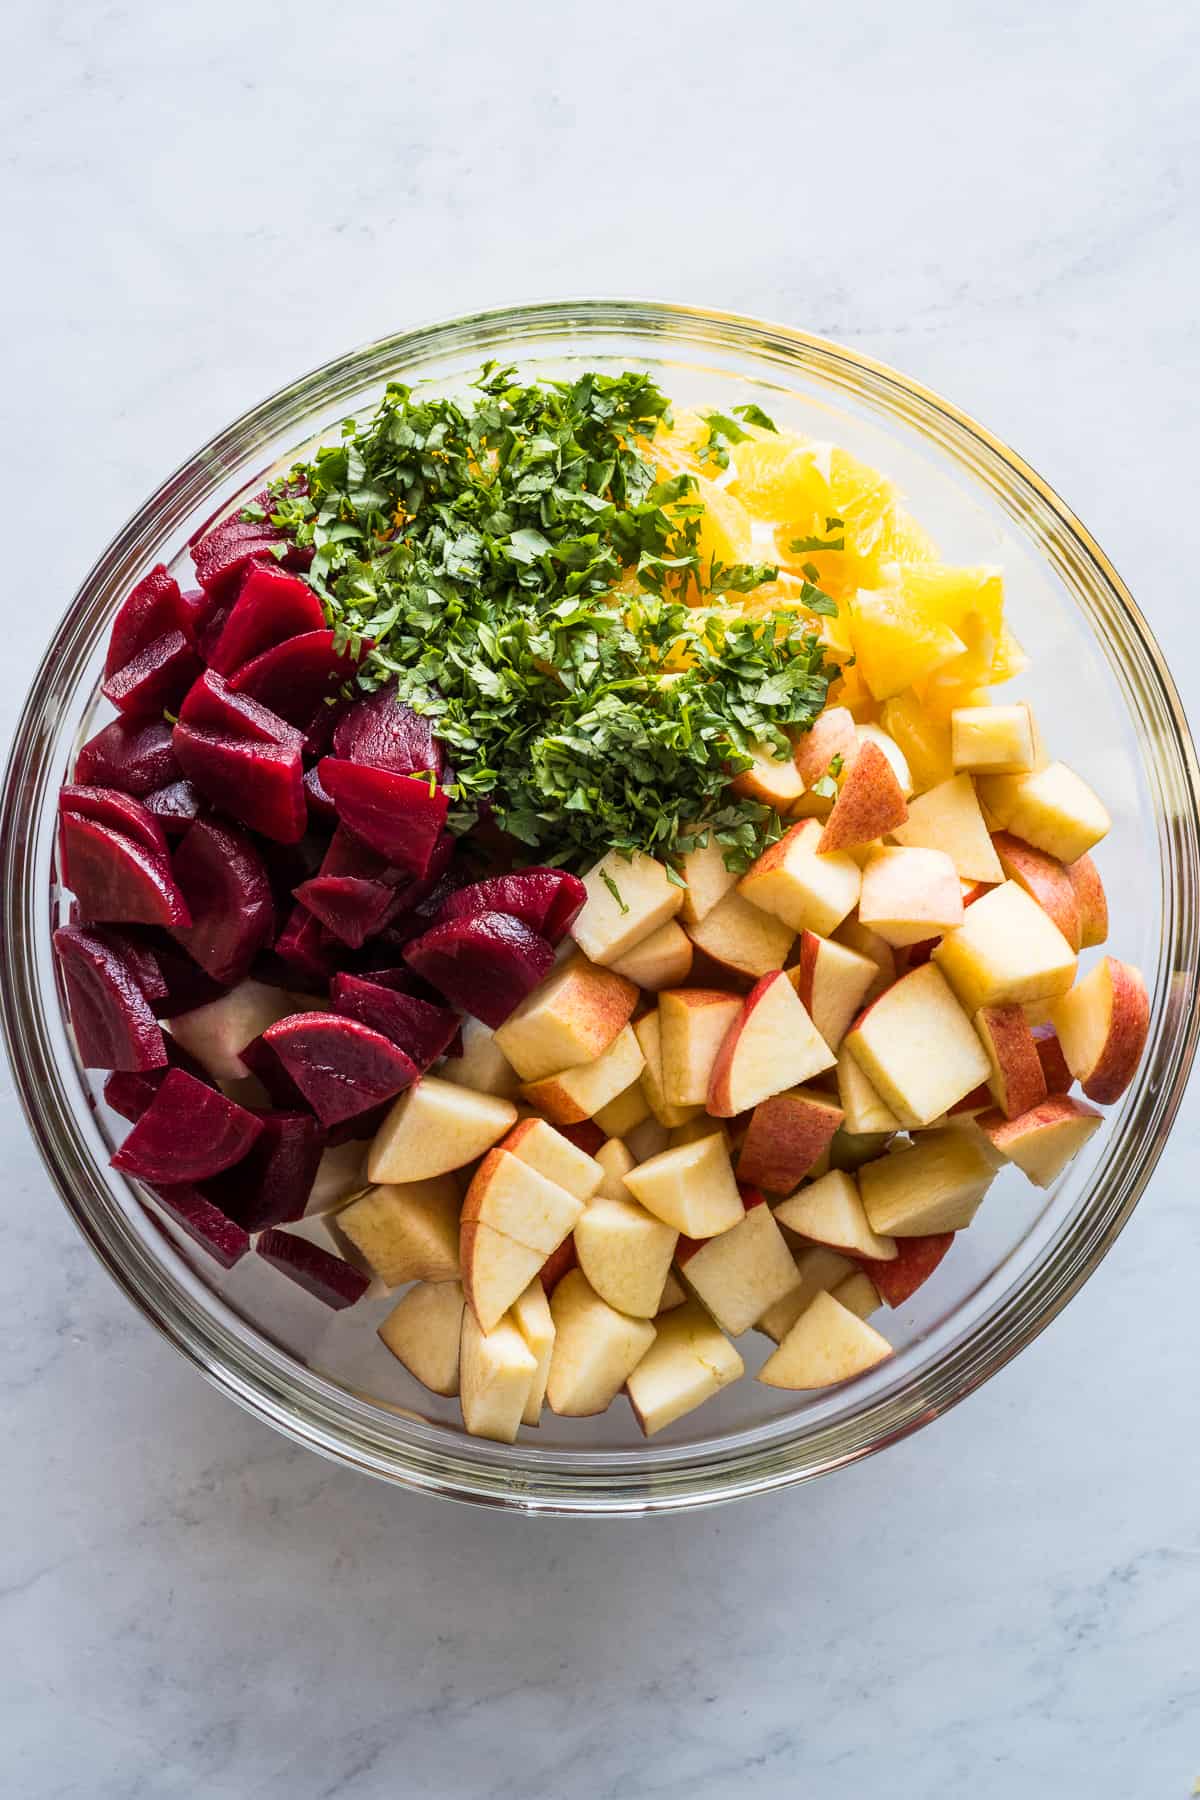 Beets, apples, oranges, jicama, cilantro, and more in a large bowl.